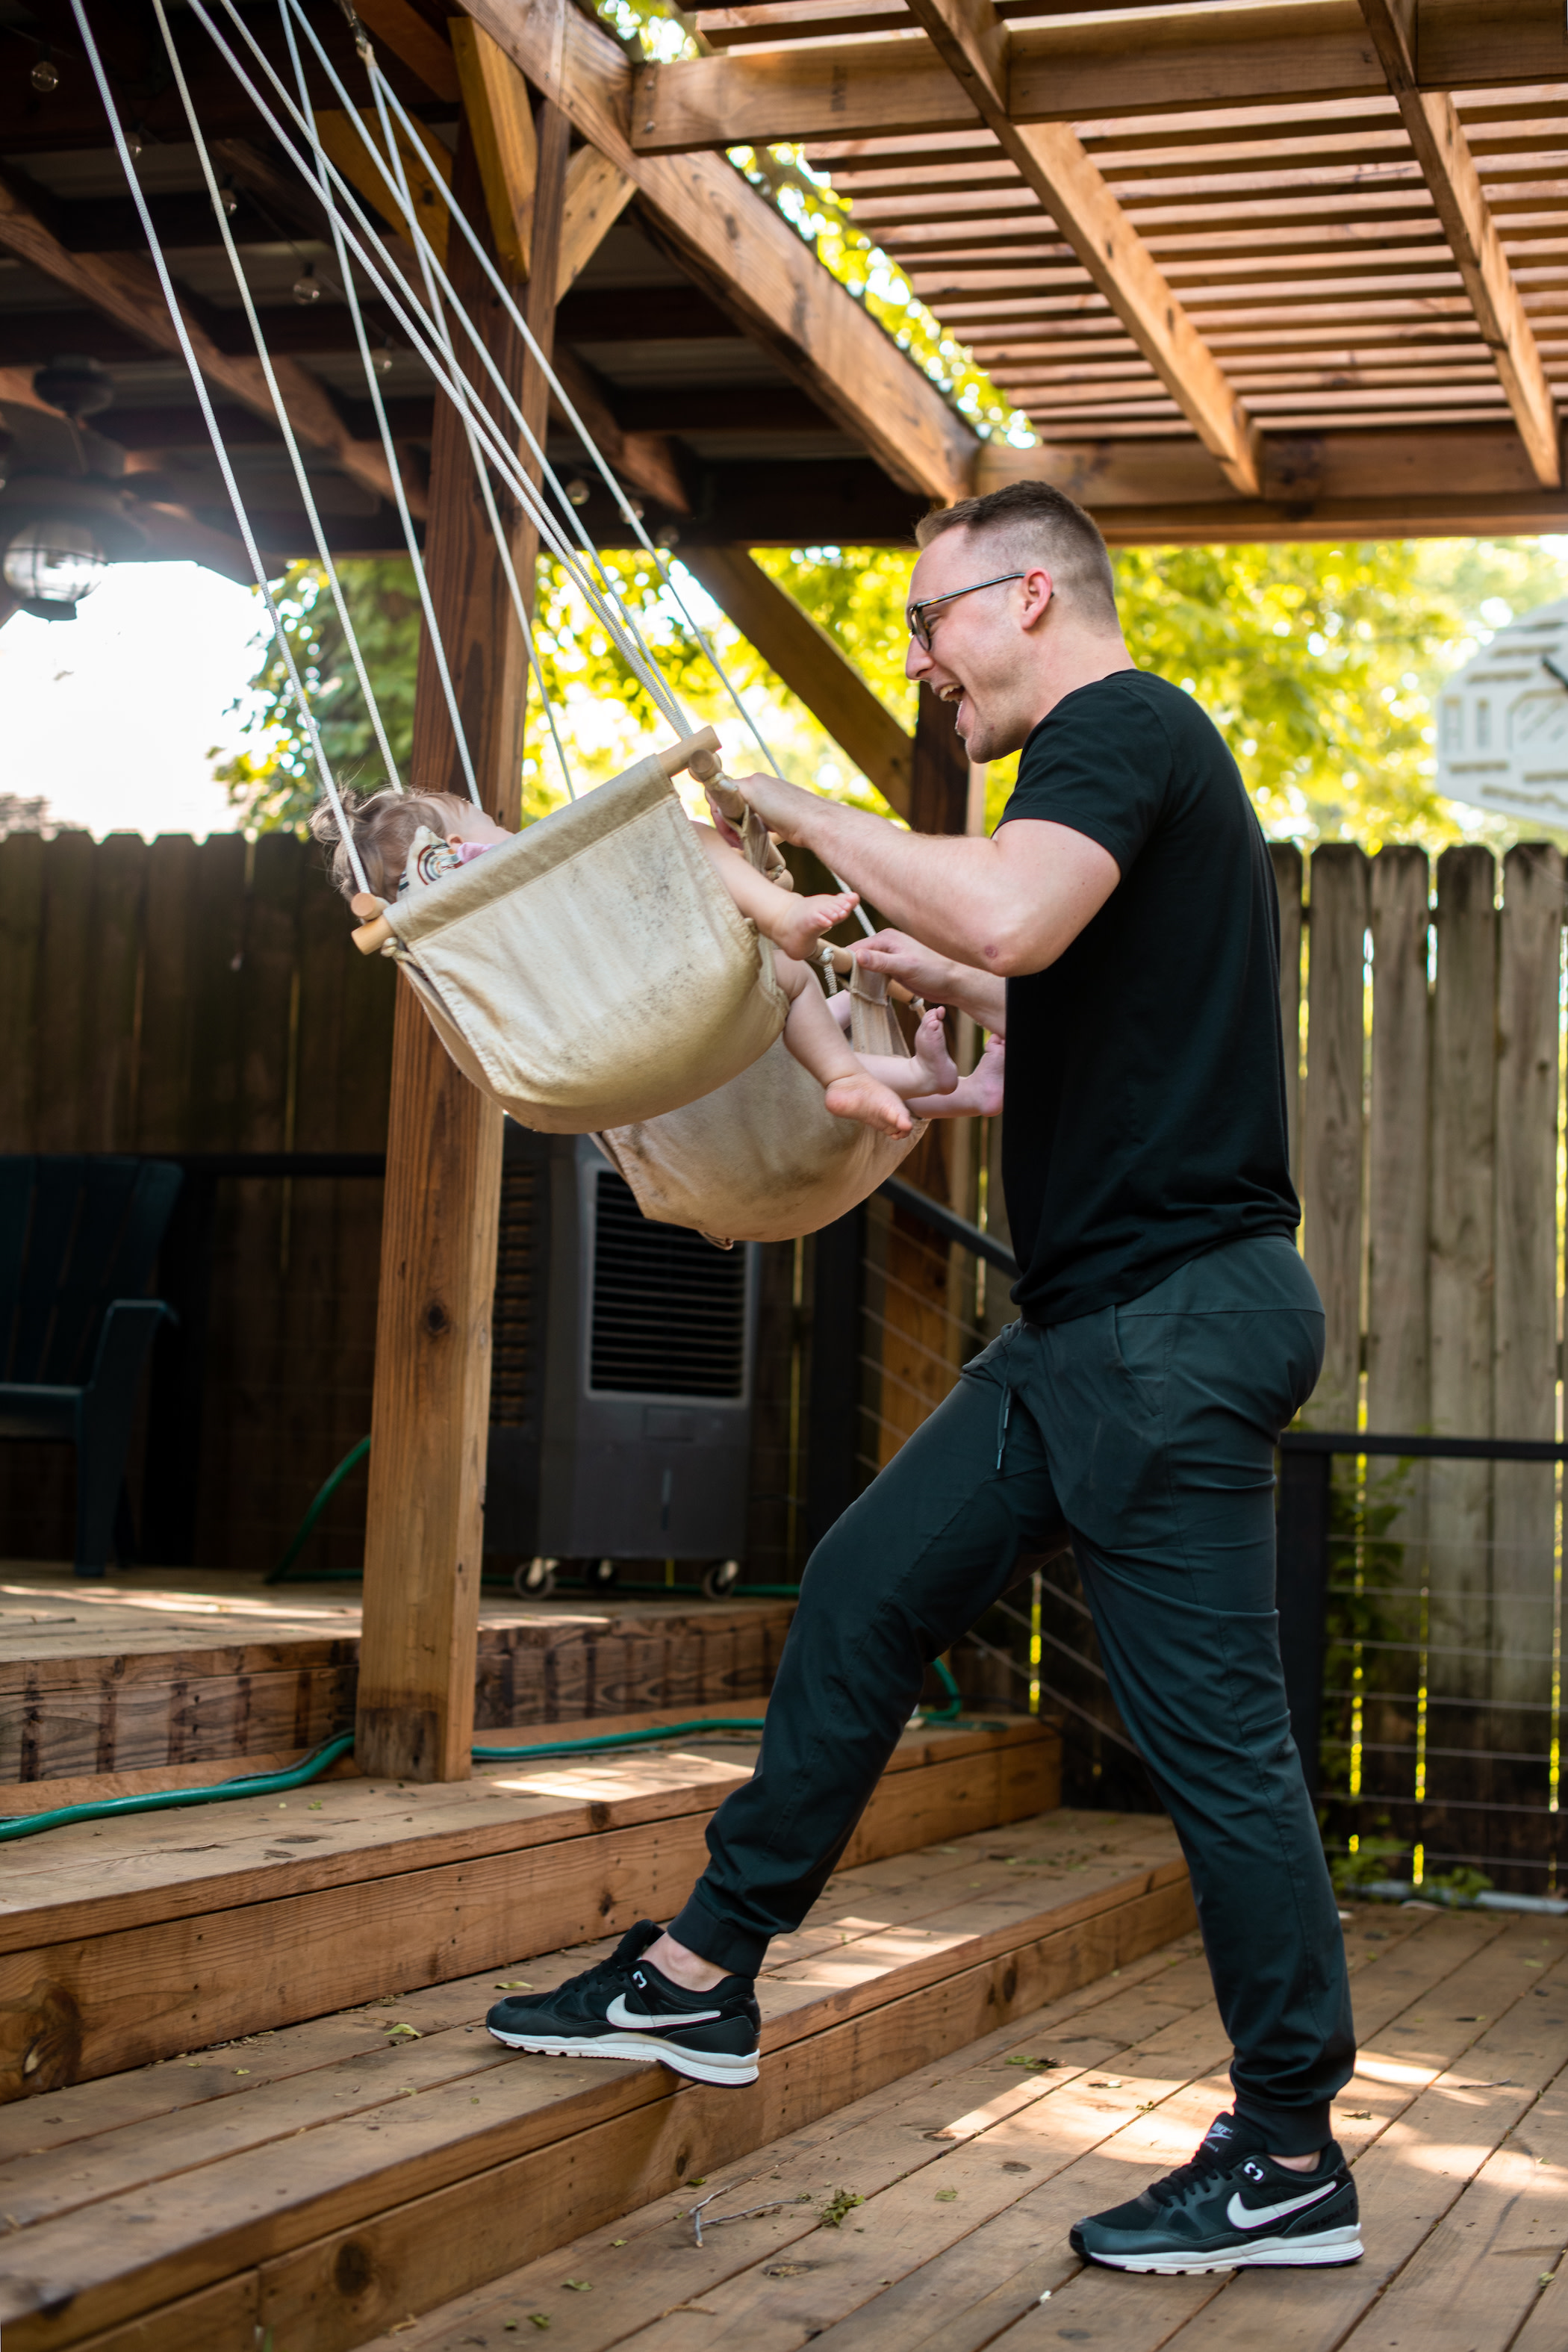 Author Aaron smiling as he pushes his twin children in swings on his back porch